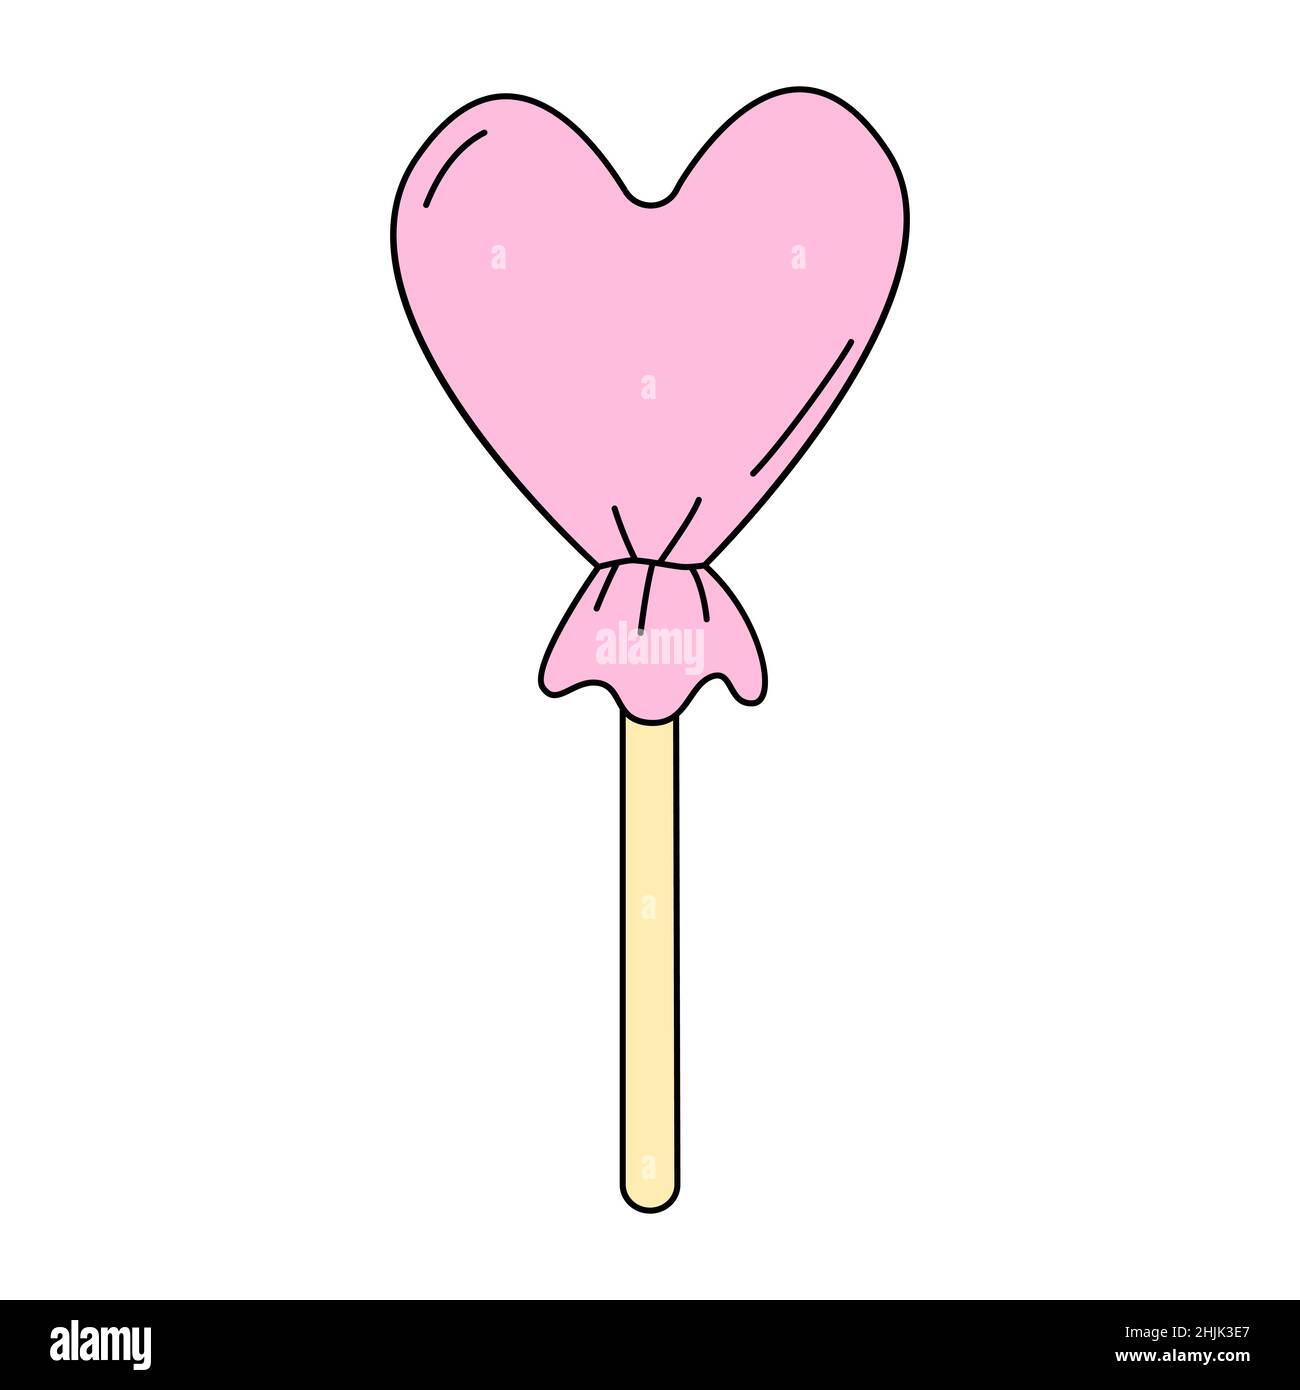 Heart-shaped lollipop in a pink wrapper. Symbol of bonbon for Valentine's Day. Vector illustration in doodle style isolated on white background Stock Vector